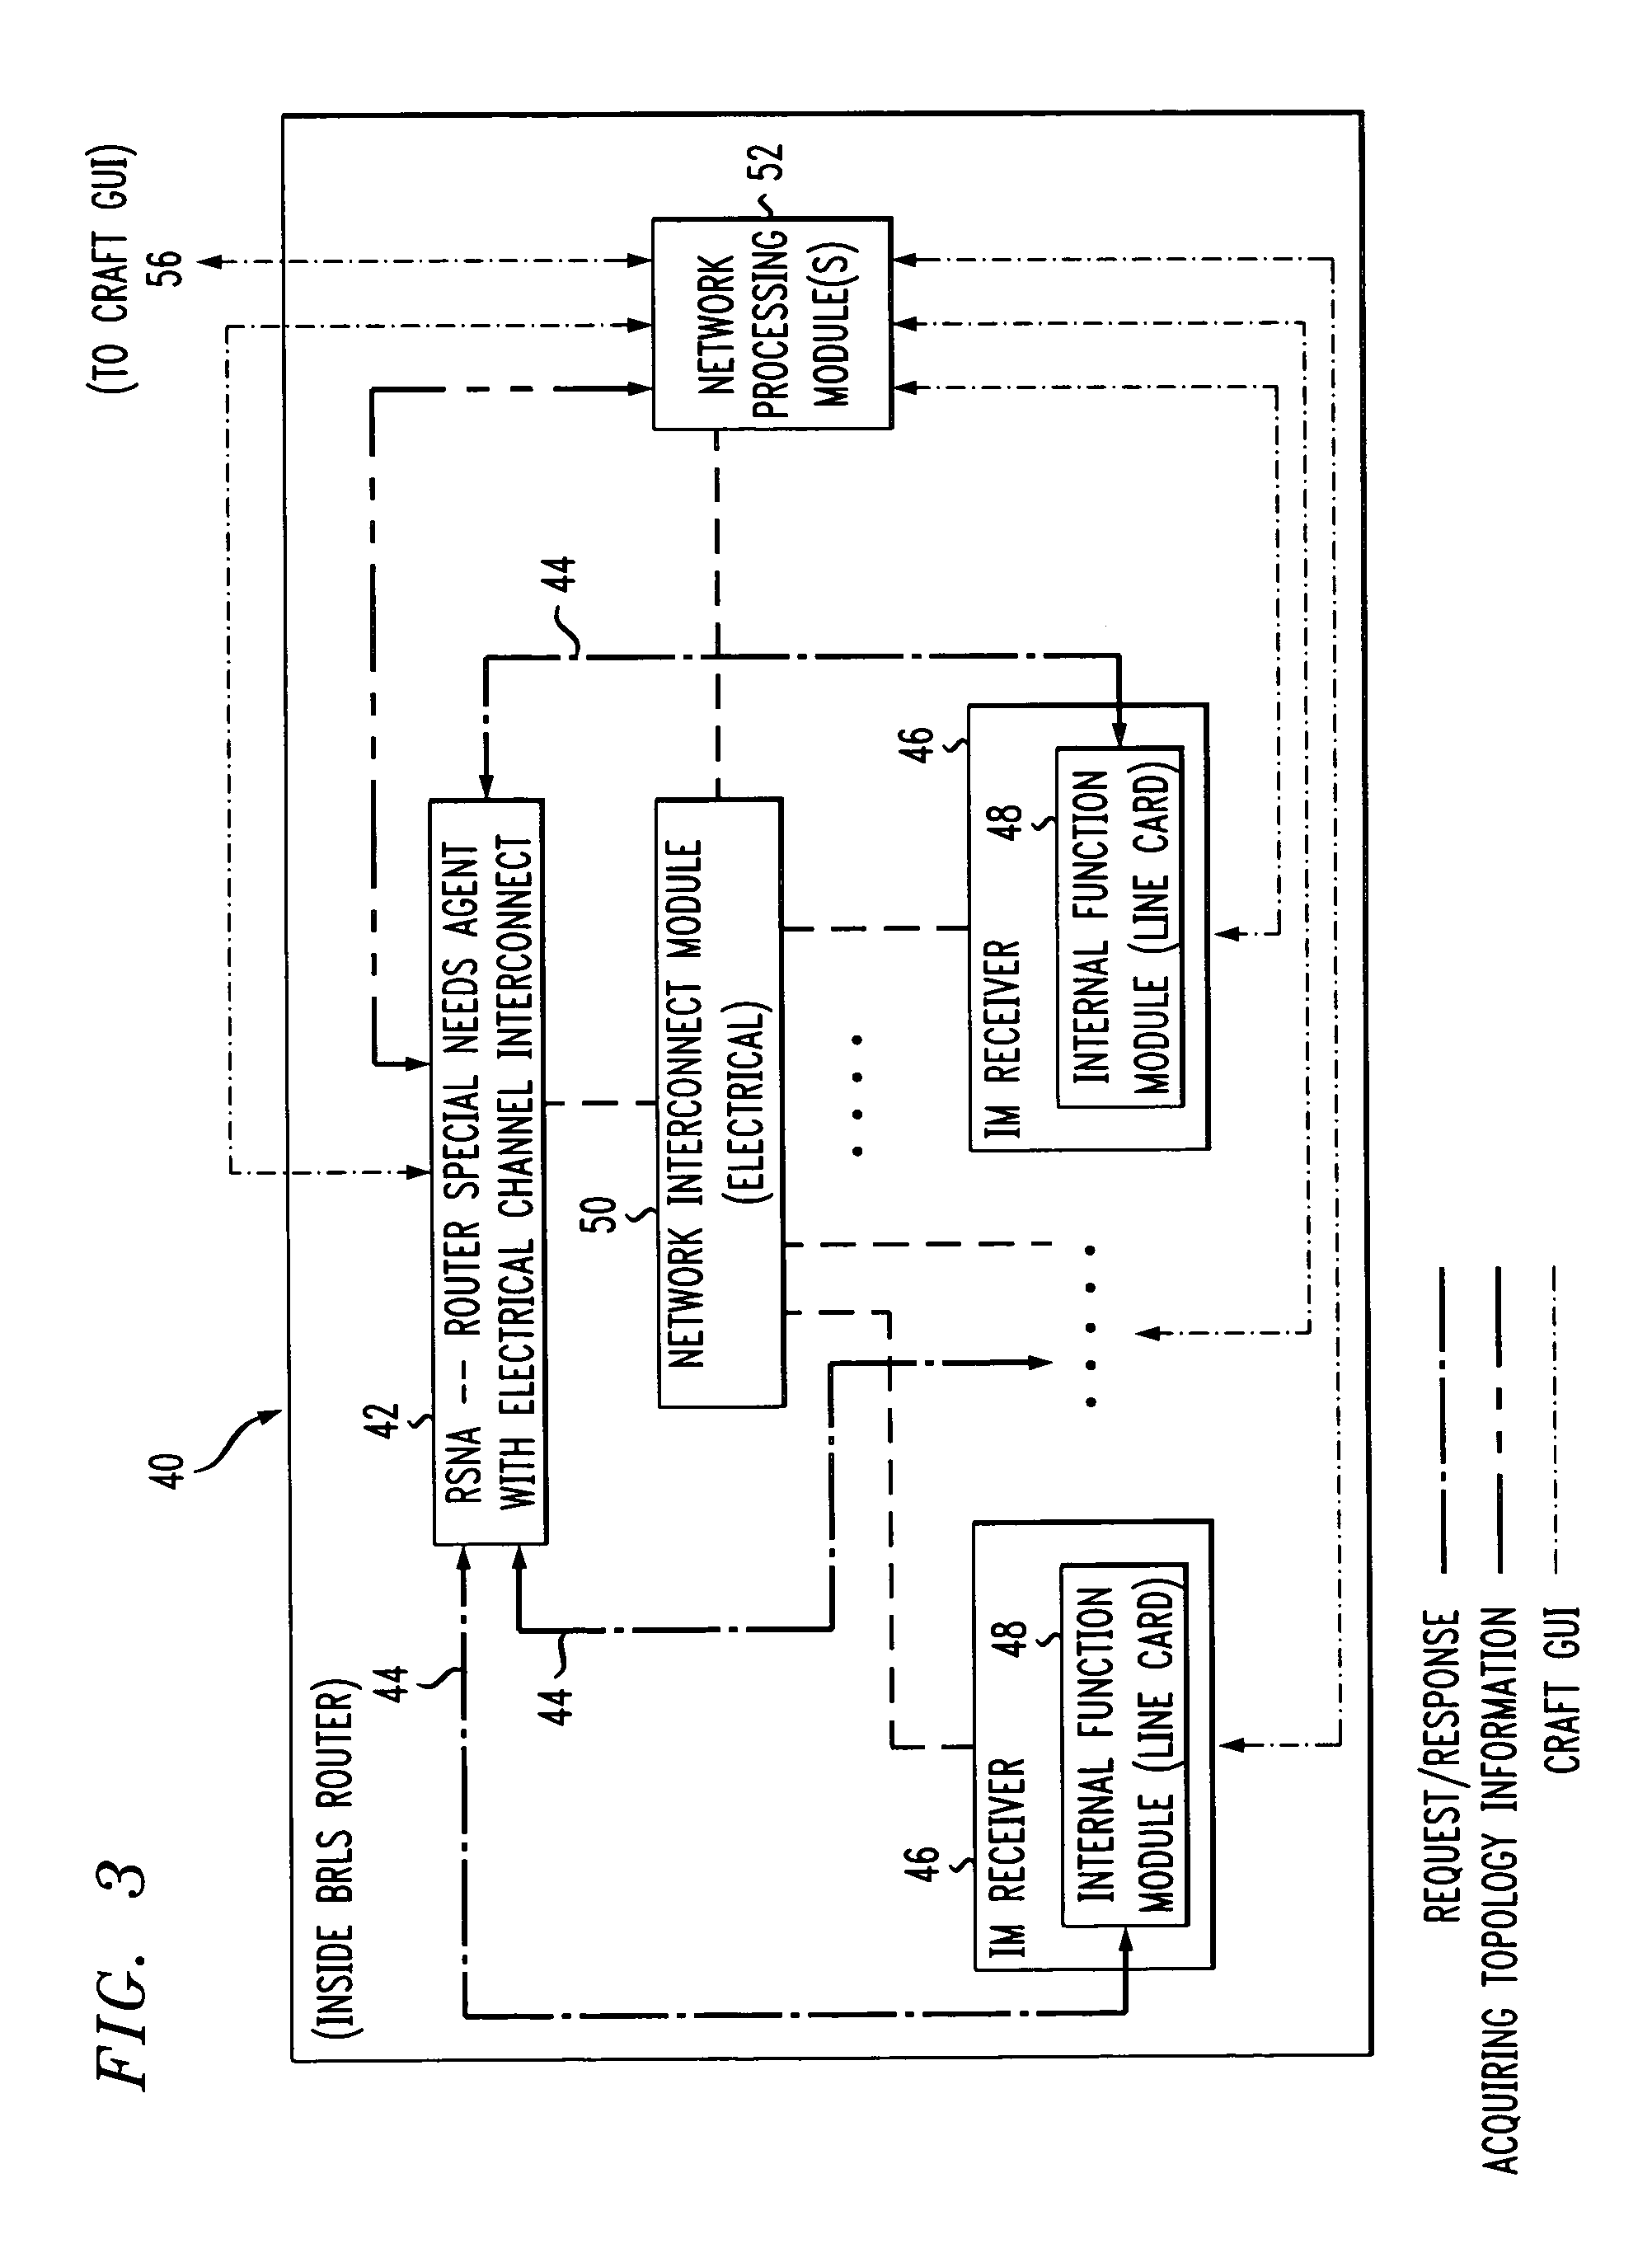 Method for operating a router having multiple processing paths